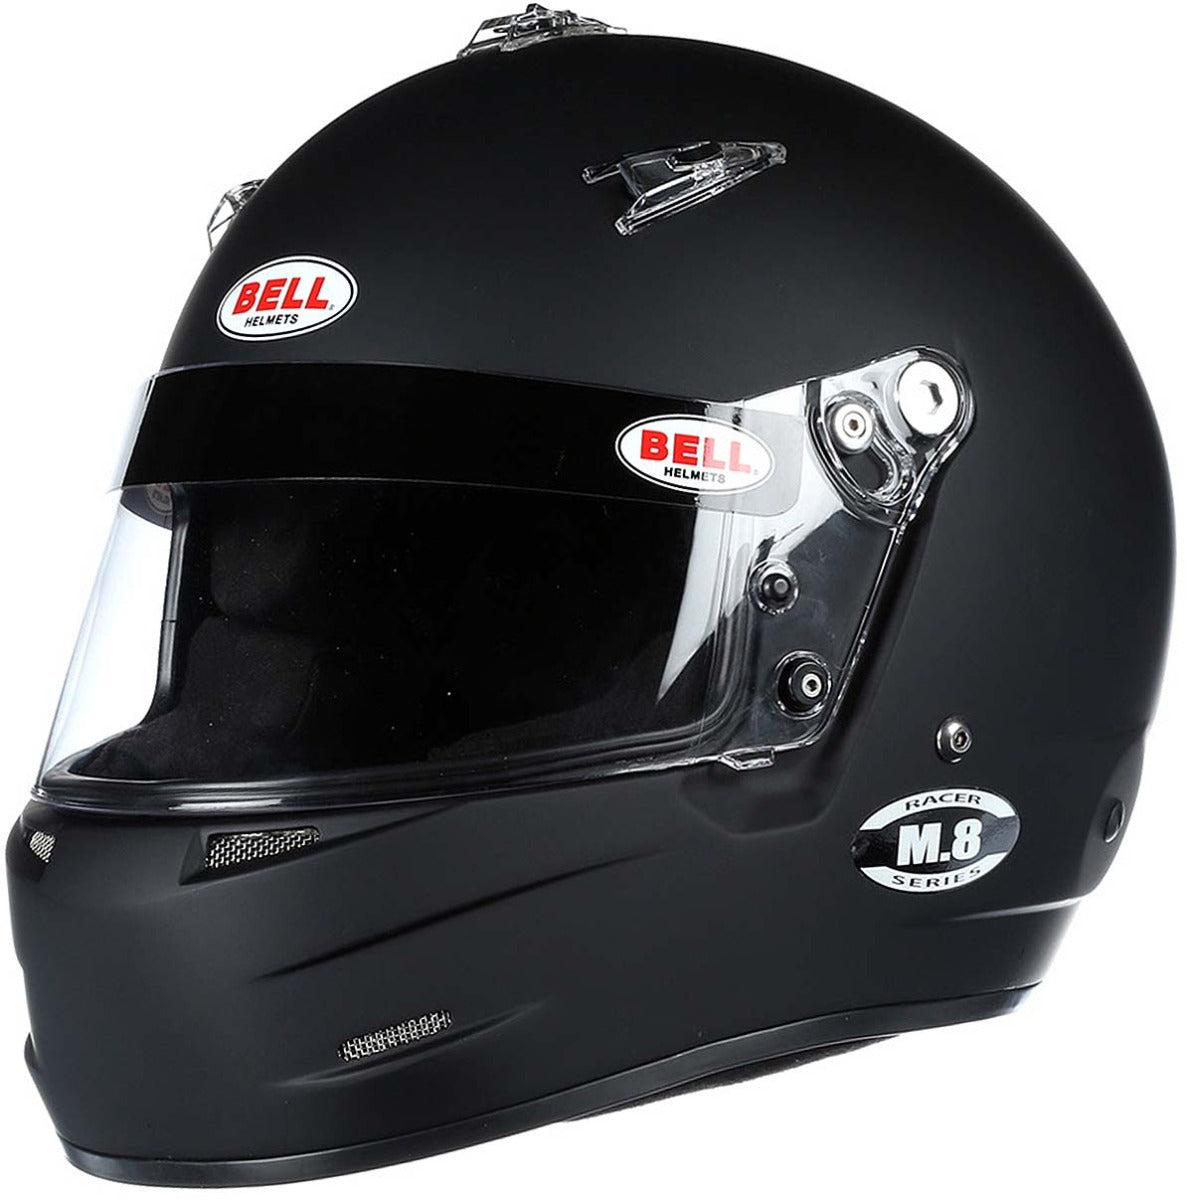 Bell M.8 Helmet SA2020 black - Front View Image